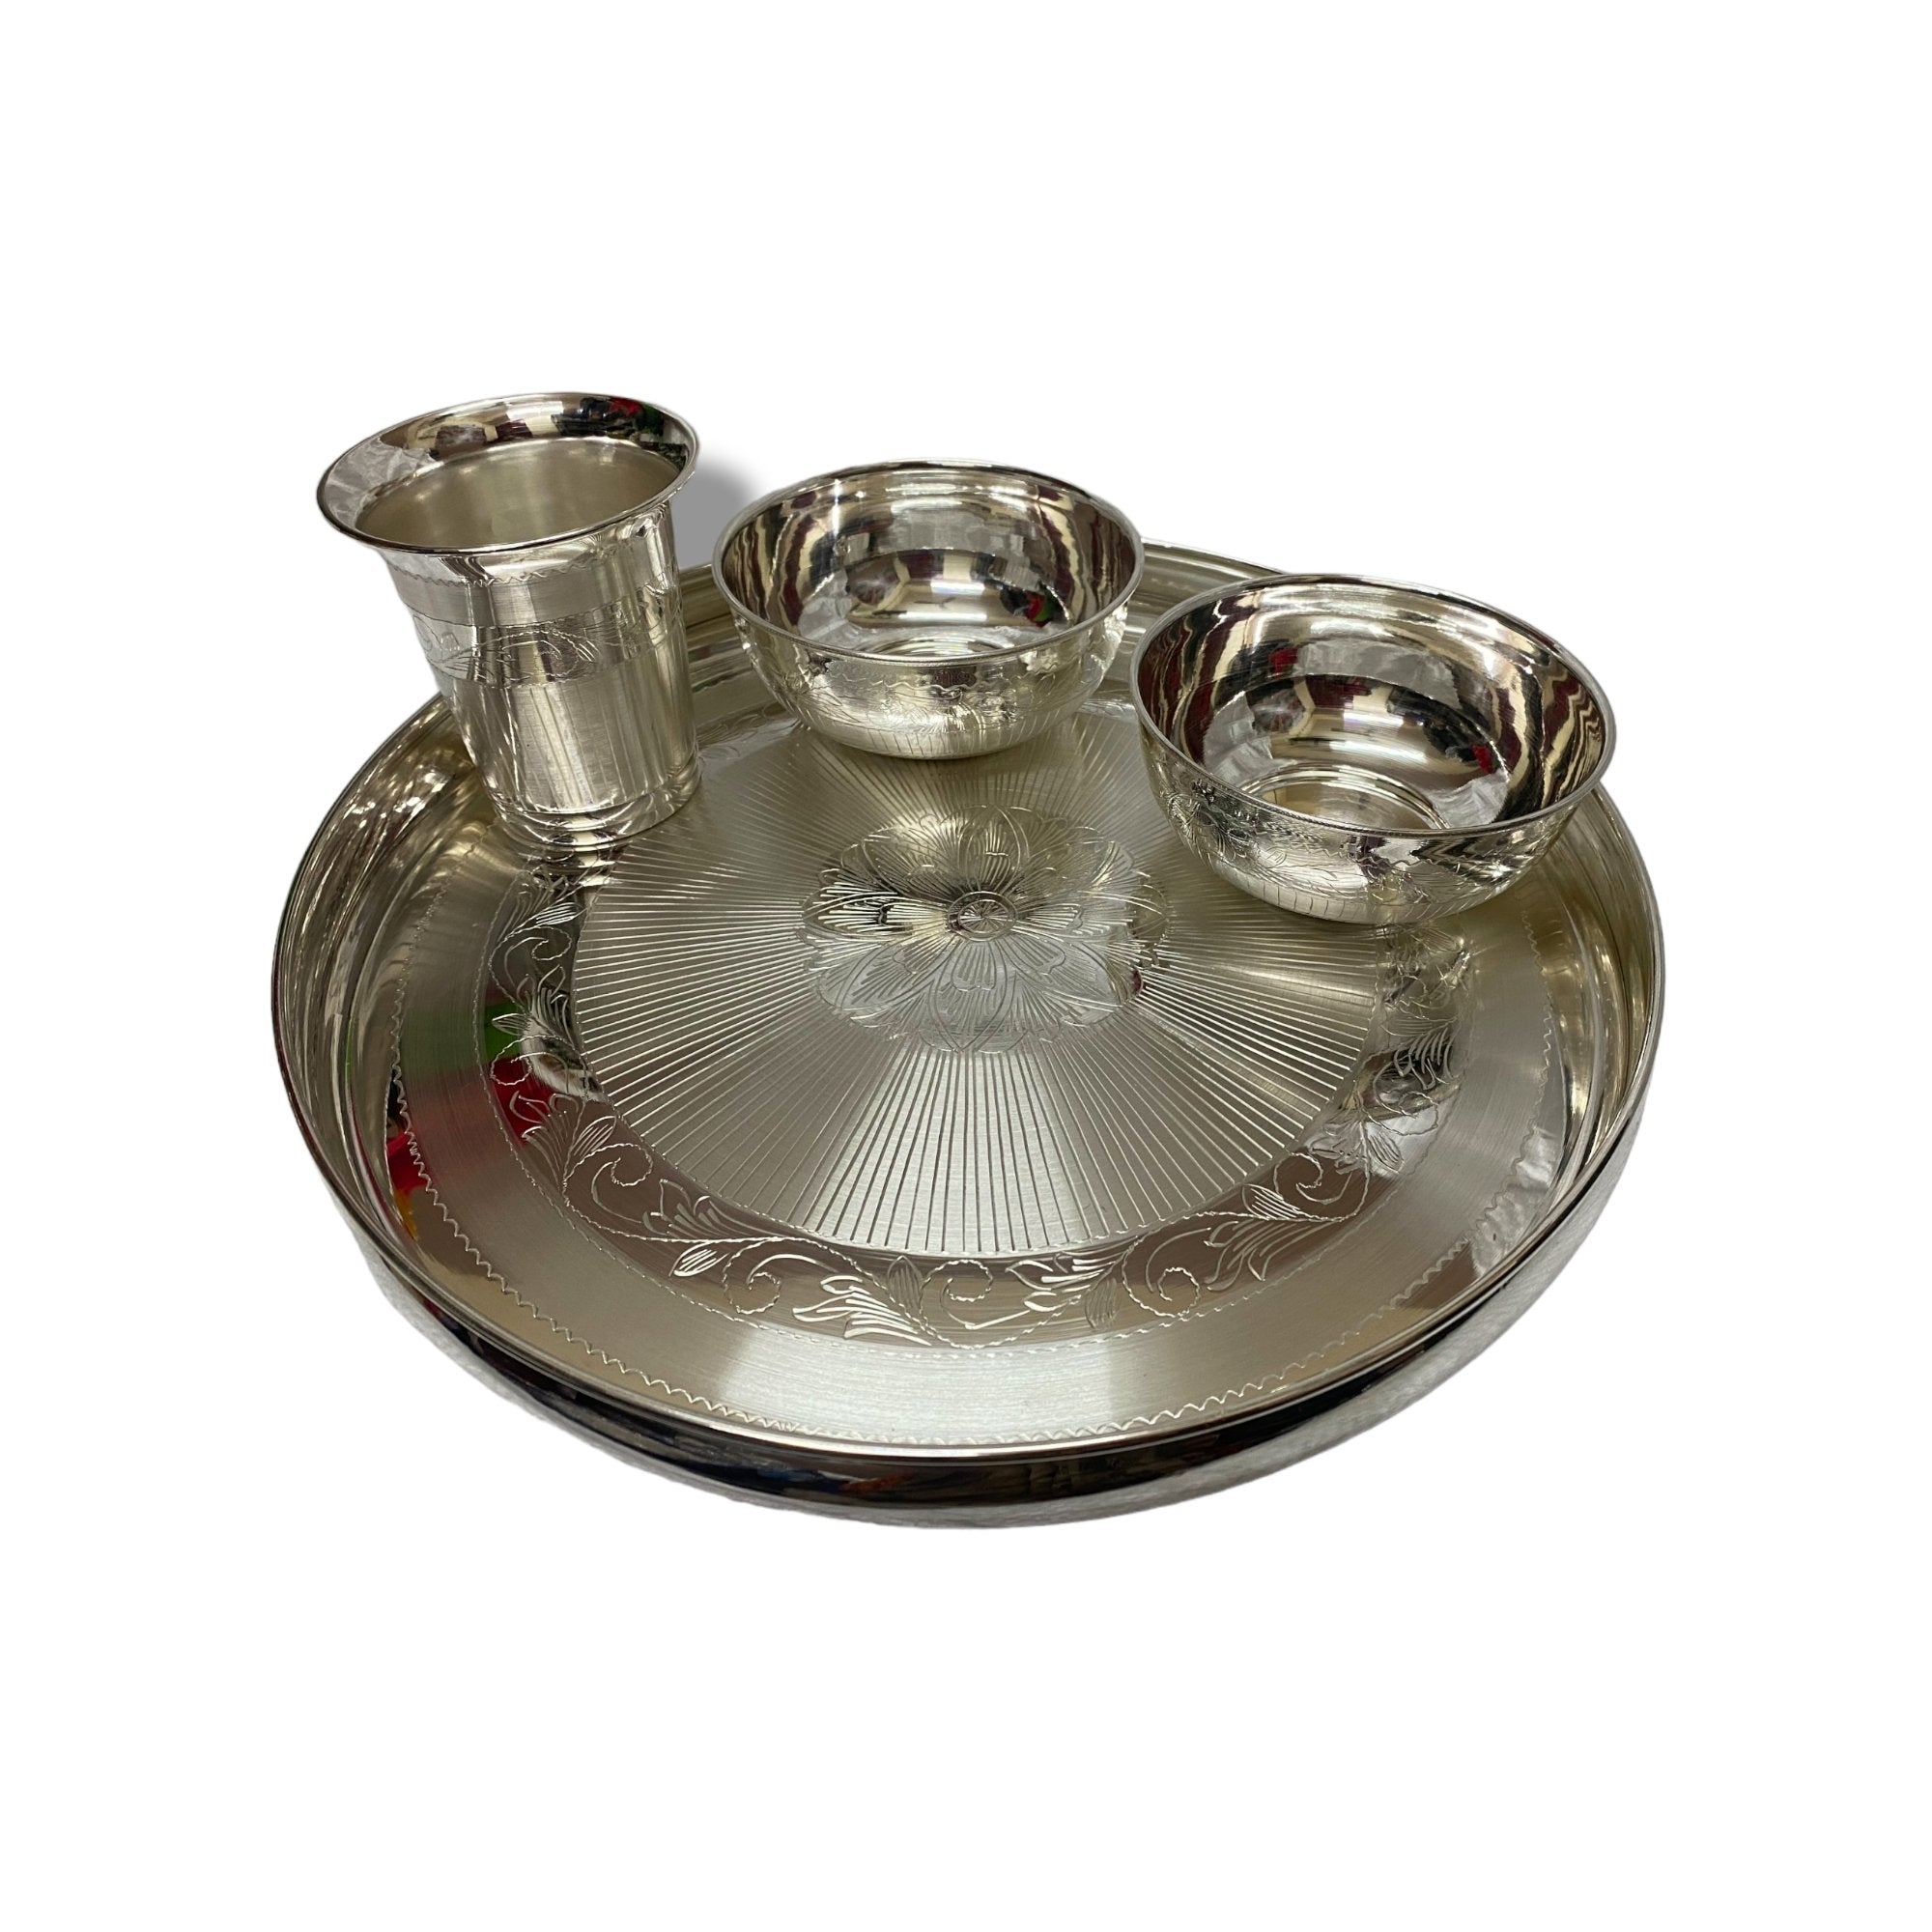 INTERNATIONAL GIFT German Silver Gift Items For Anniversary Wedding Gift  For Couples Gifts Gifts Bowls For Pooja Home Decoration House Warming Items  For Diwali Family Gifts Home Décor Bowl Serving Set Price